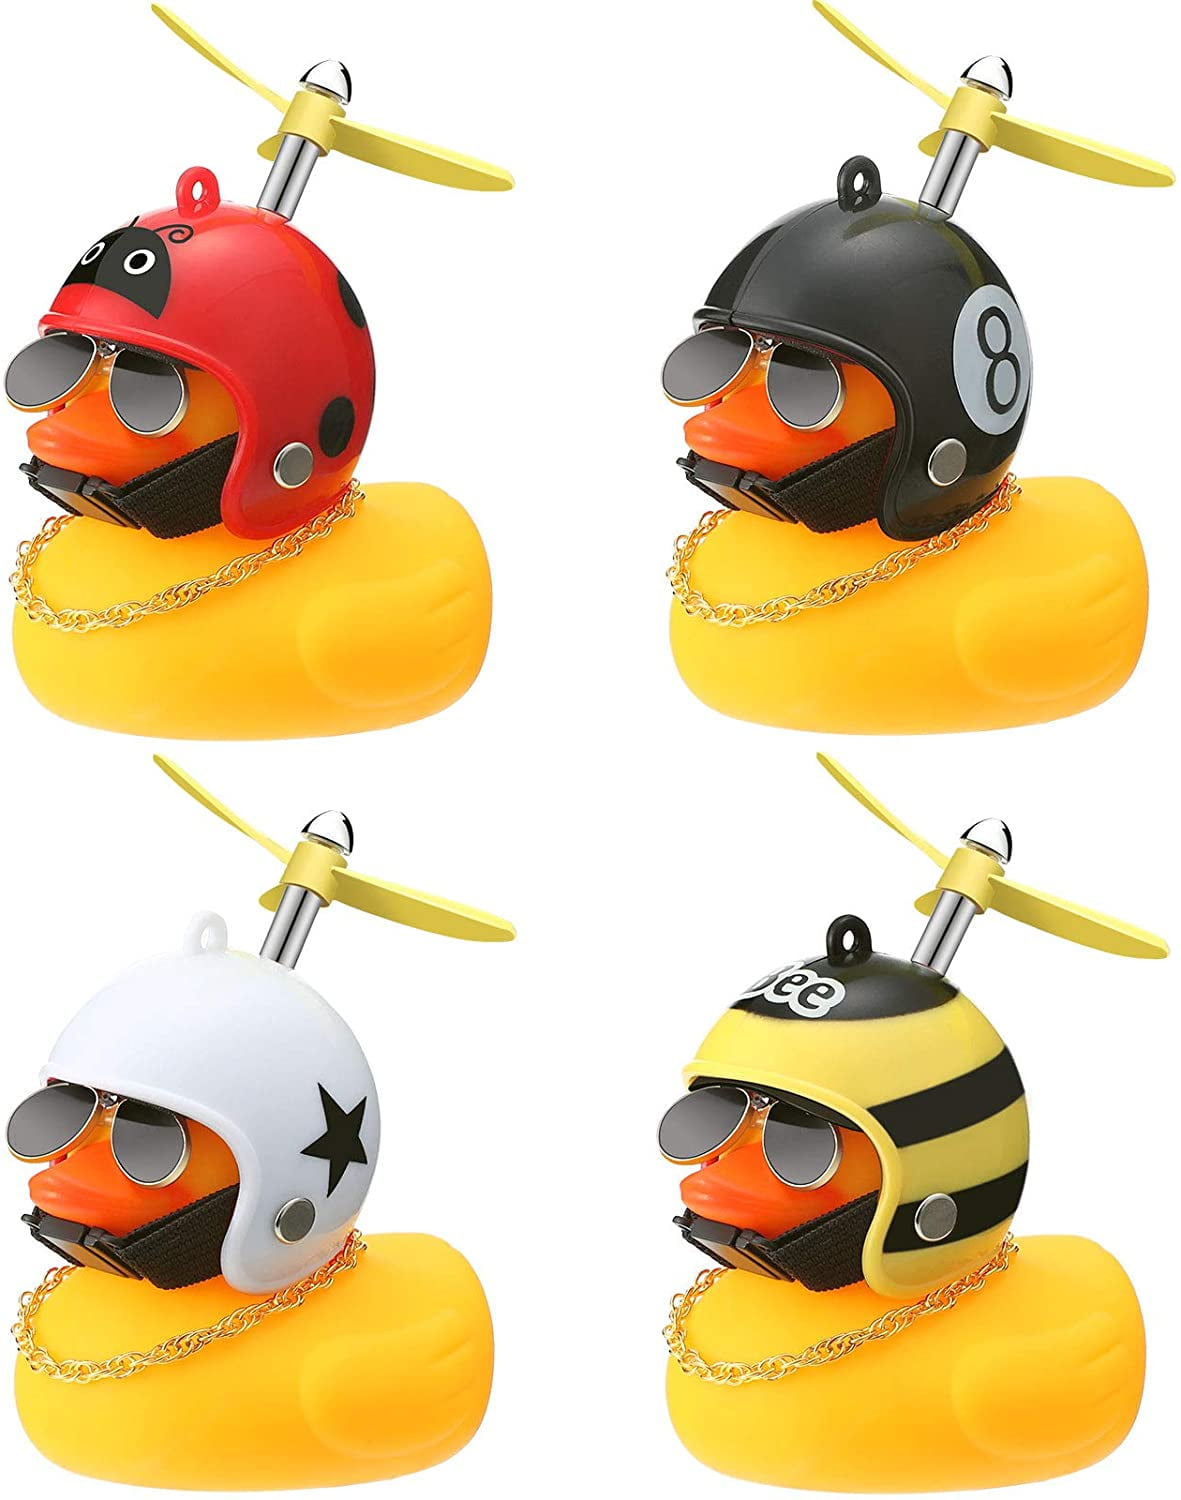 Rubber Duck Toy Car Ornaments Yellow Duck Car Dashboard Decorations with Propeller Helmet Red